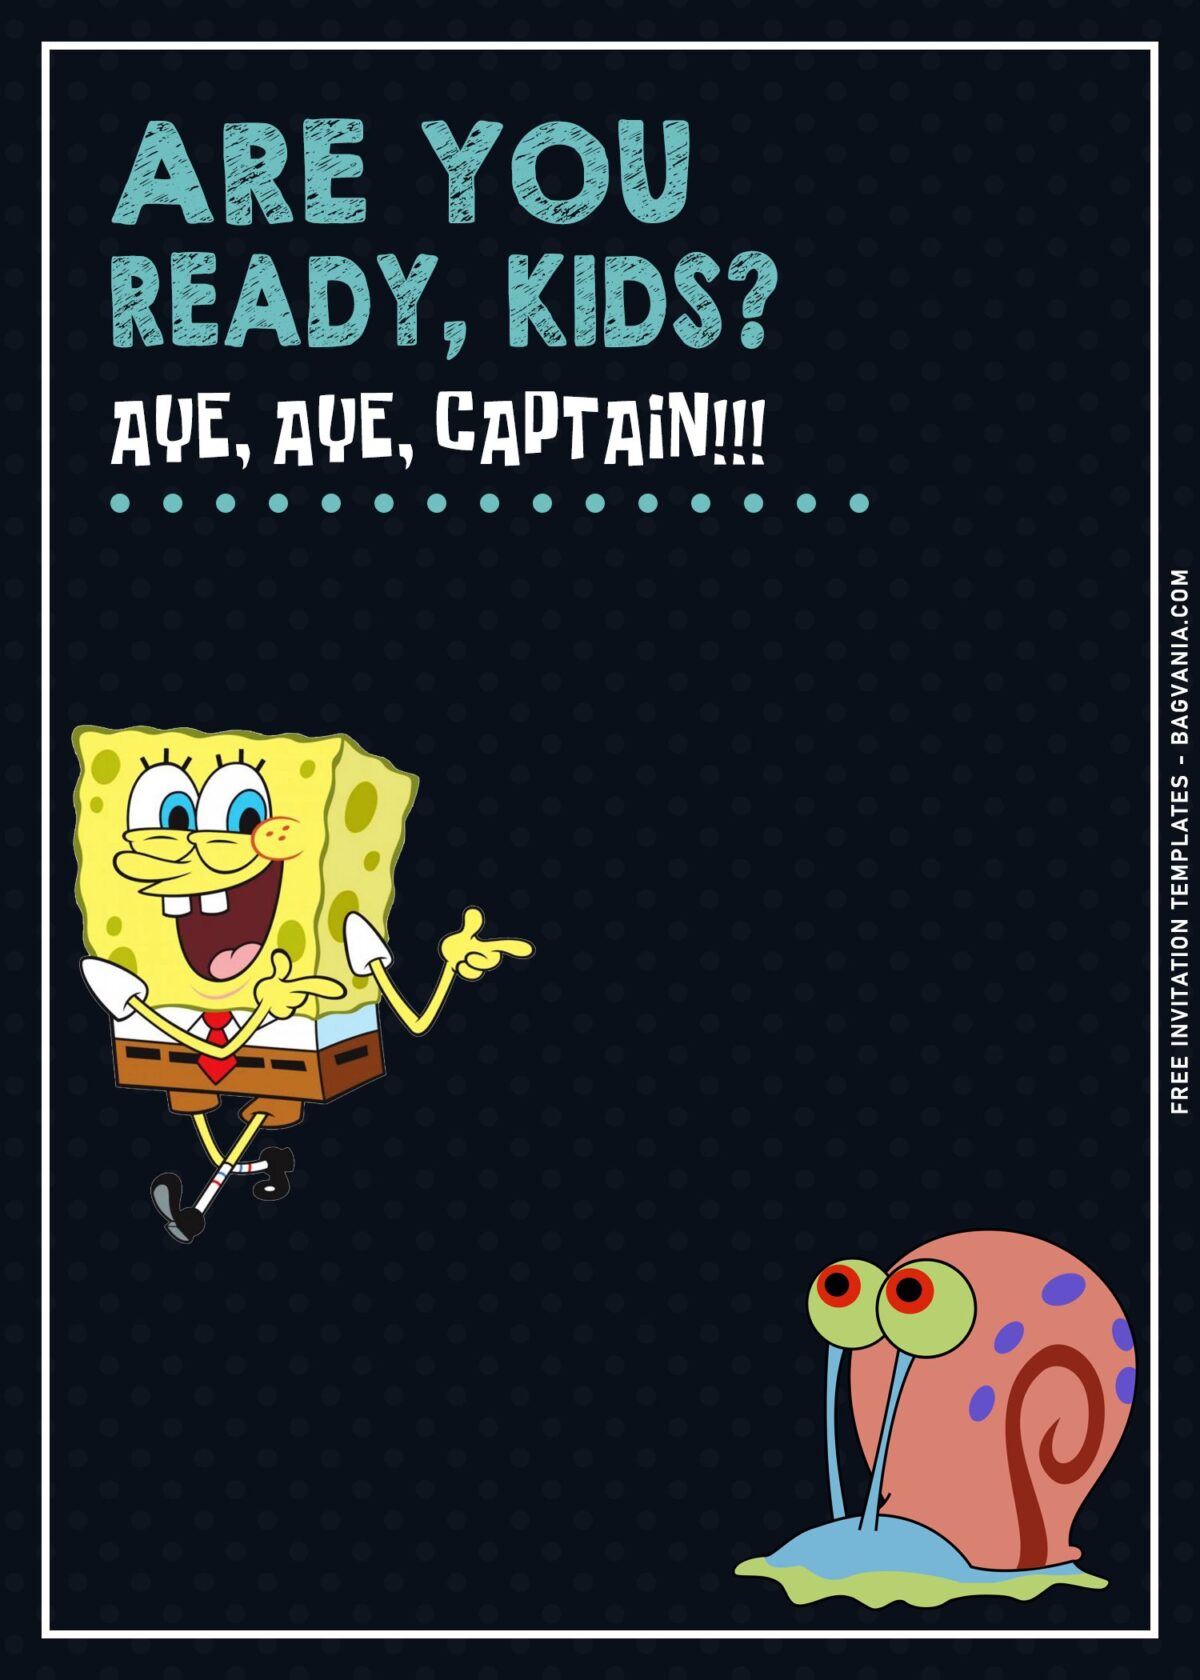 10+ Lively Colored SpongeBob SquarePants Birthday Invitation Templates with adorable Gary the Snail